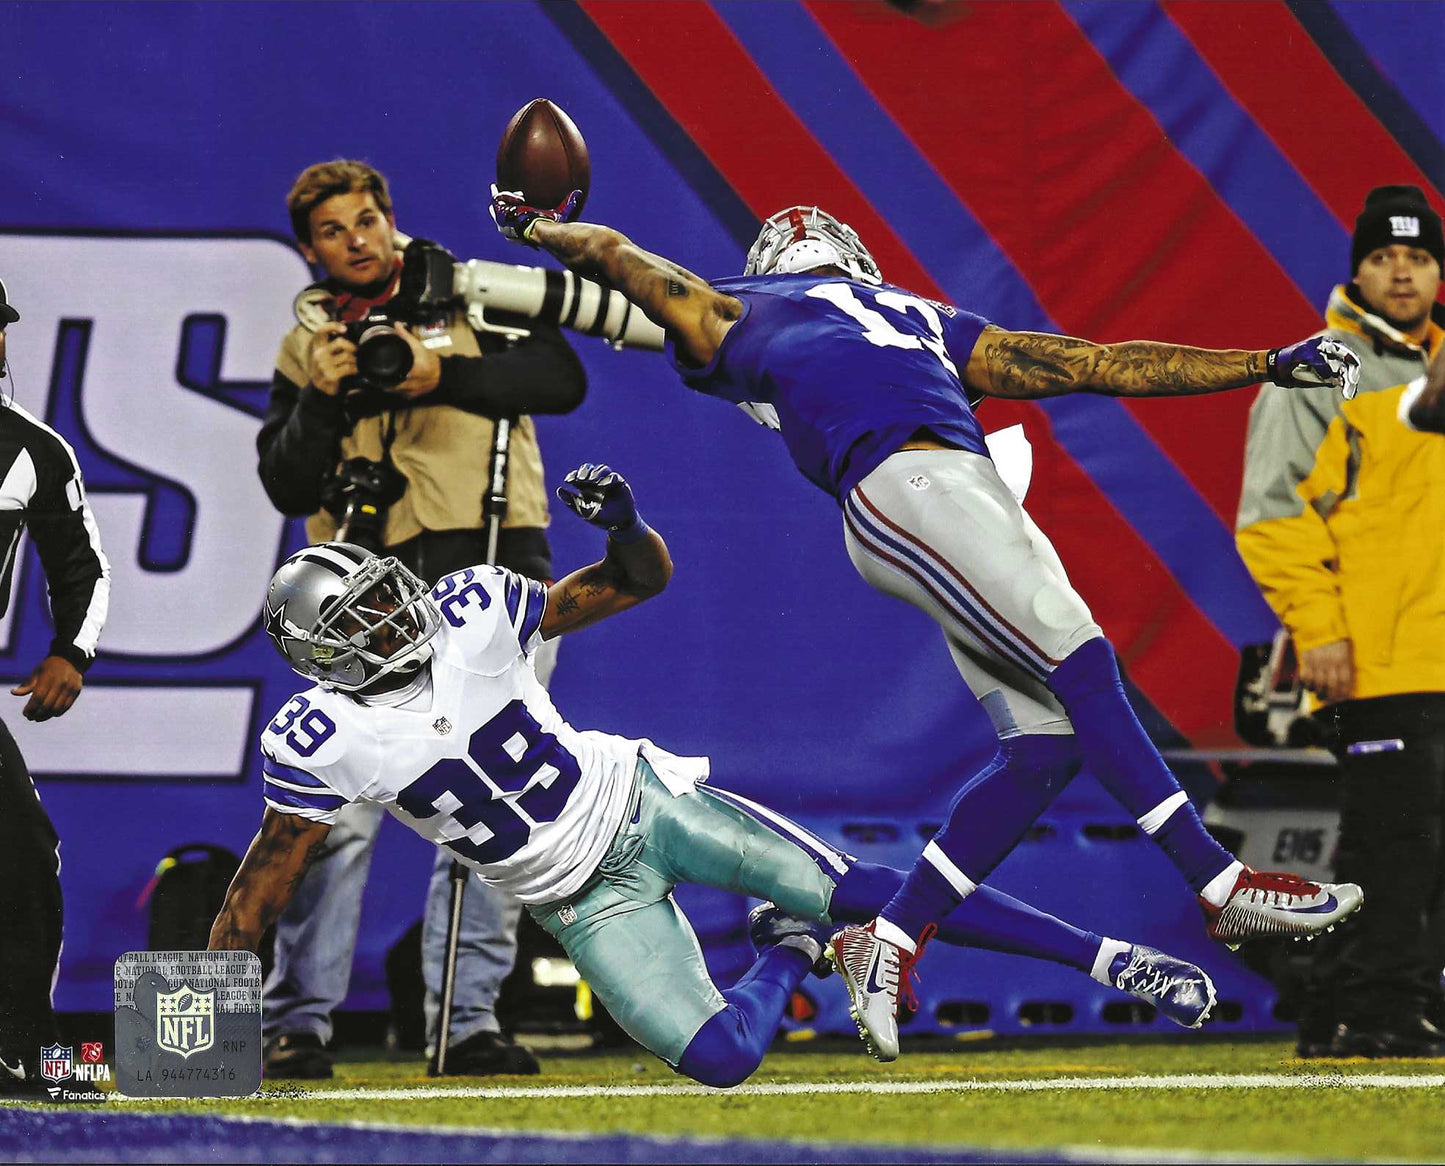 New York Giants Odell Beckham Jr. Makes The Catch Of A Life Time! 8x10 Photo Picture